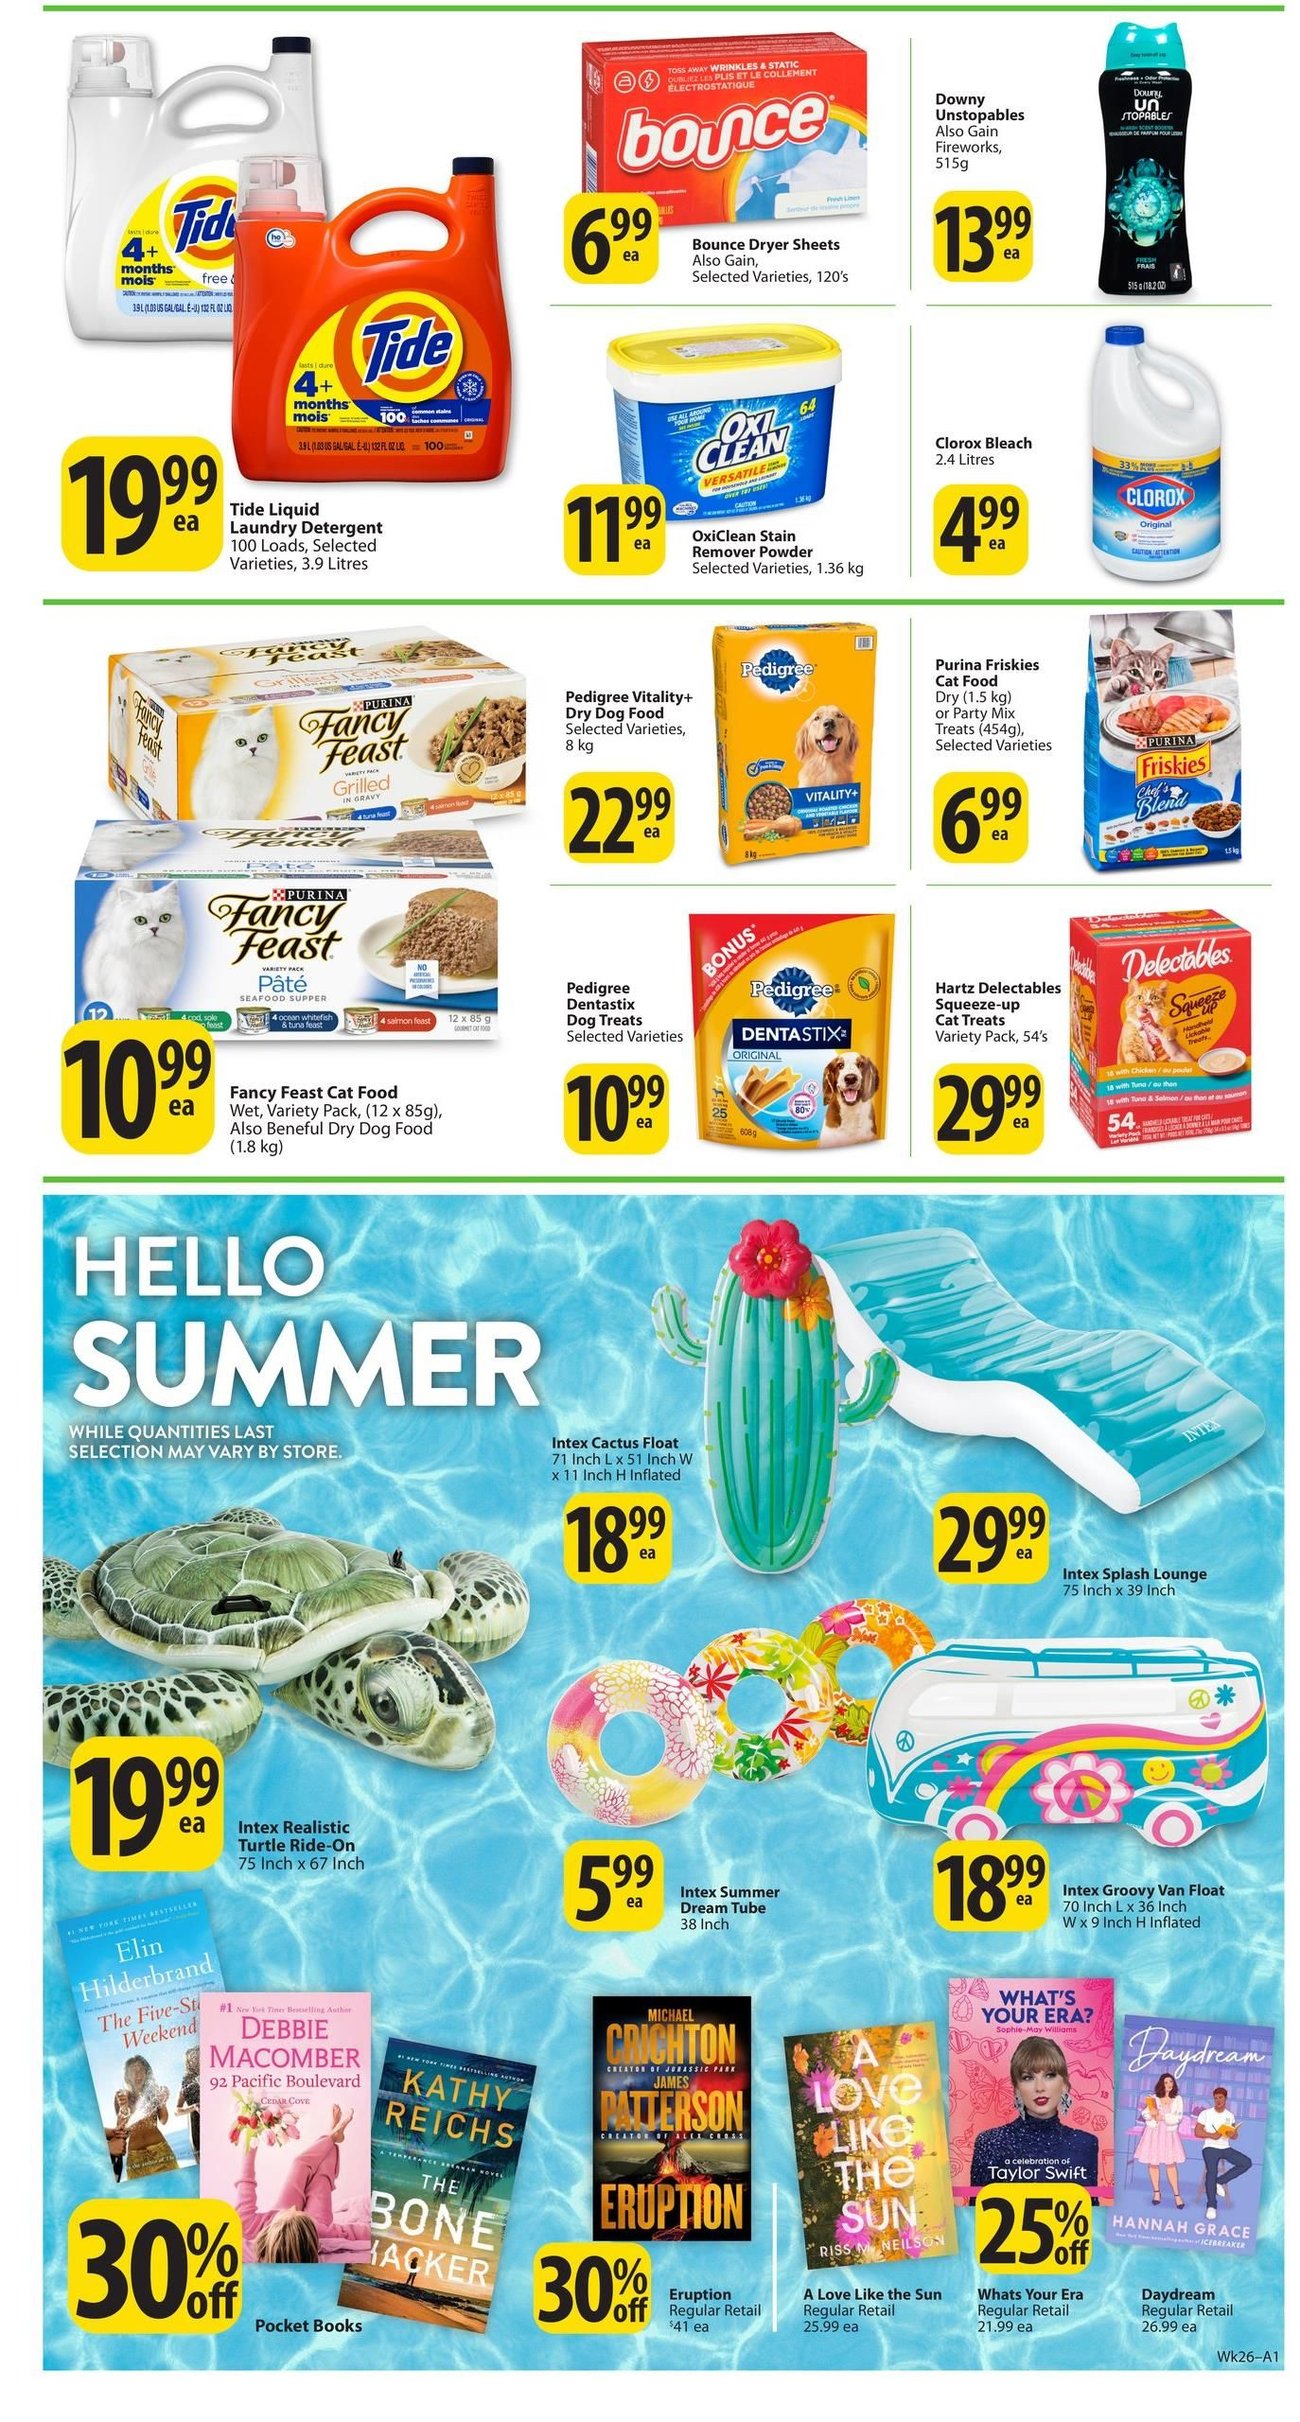 Save-On-Foods - British Columbia - Weekly Flyer Specials - Page 20